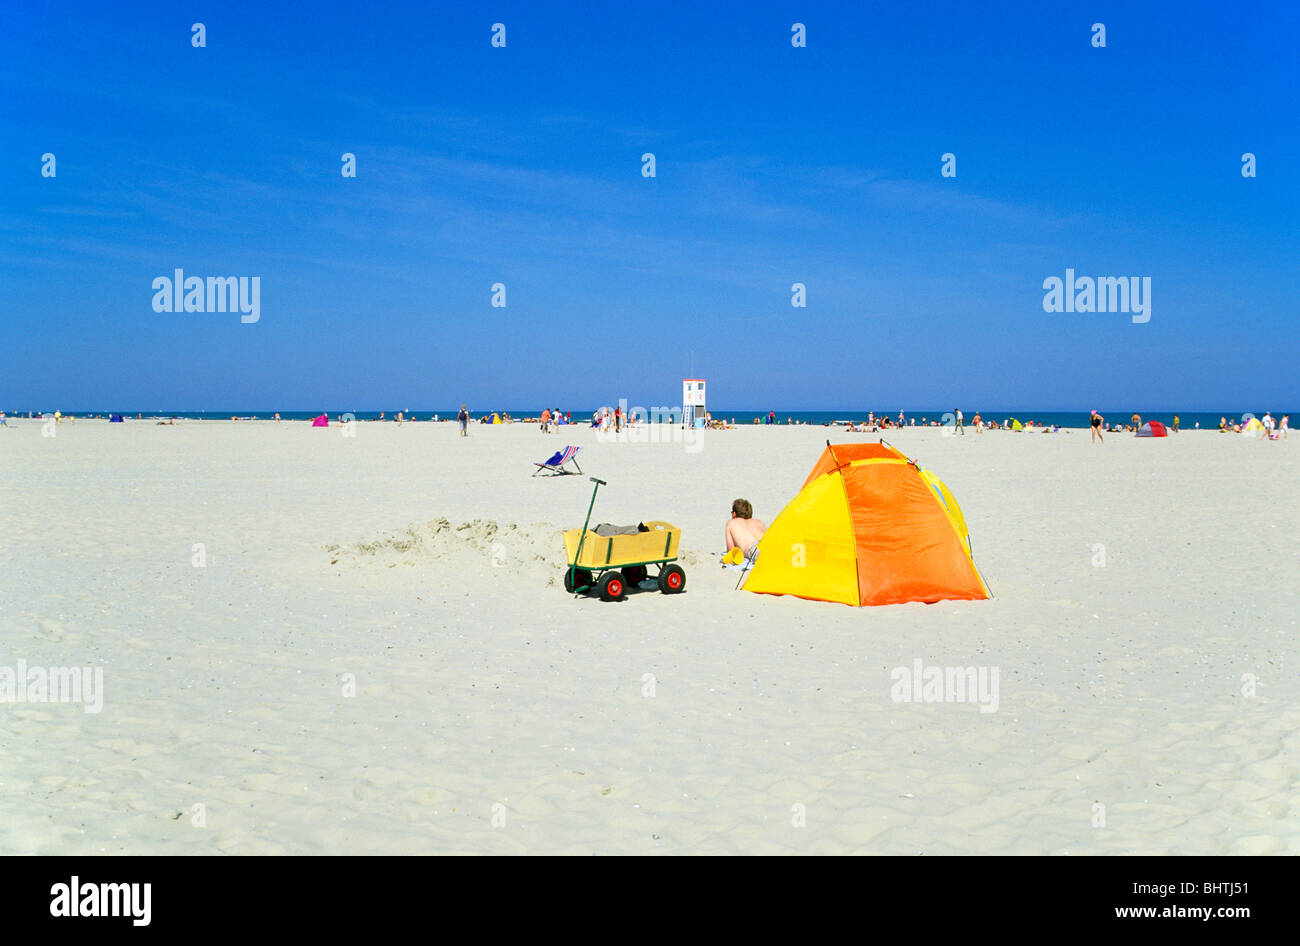 beach cabana and hand trolley at the beach of Juist Island, East Friesland, Lower Saxony, Germany Stock Photo